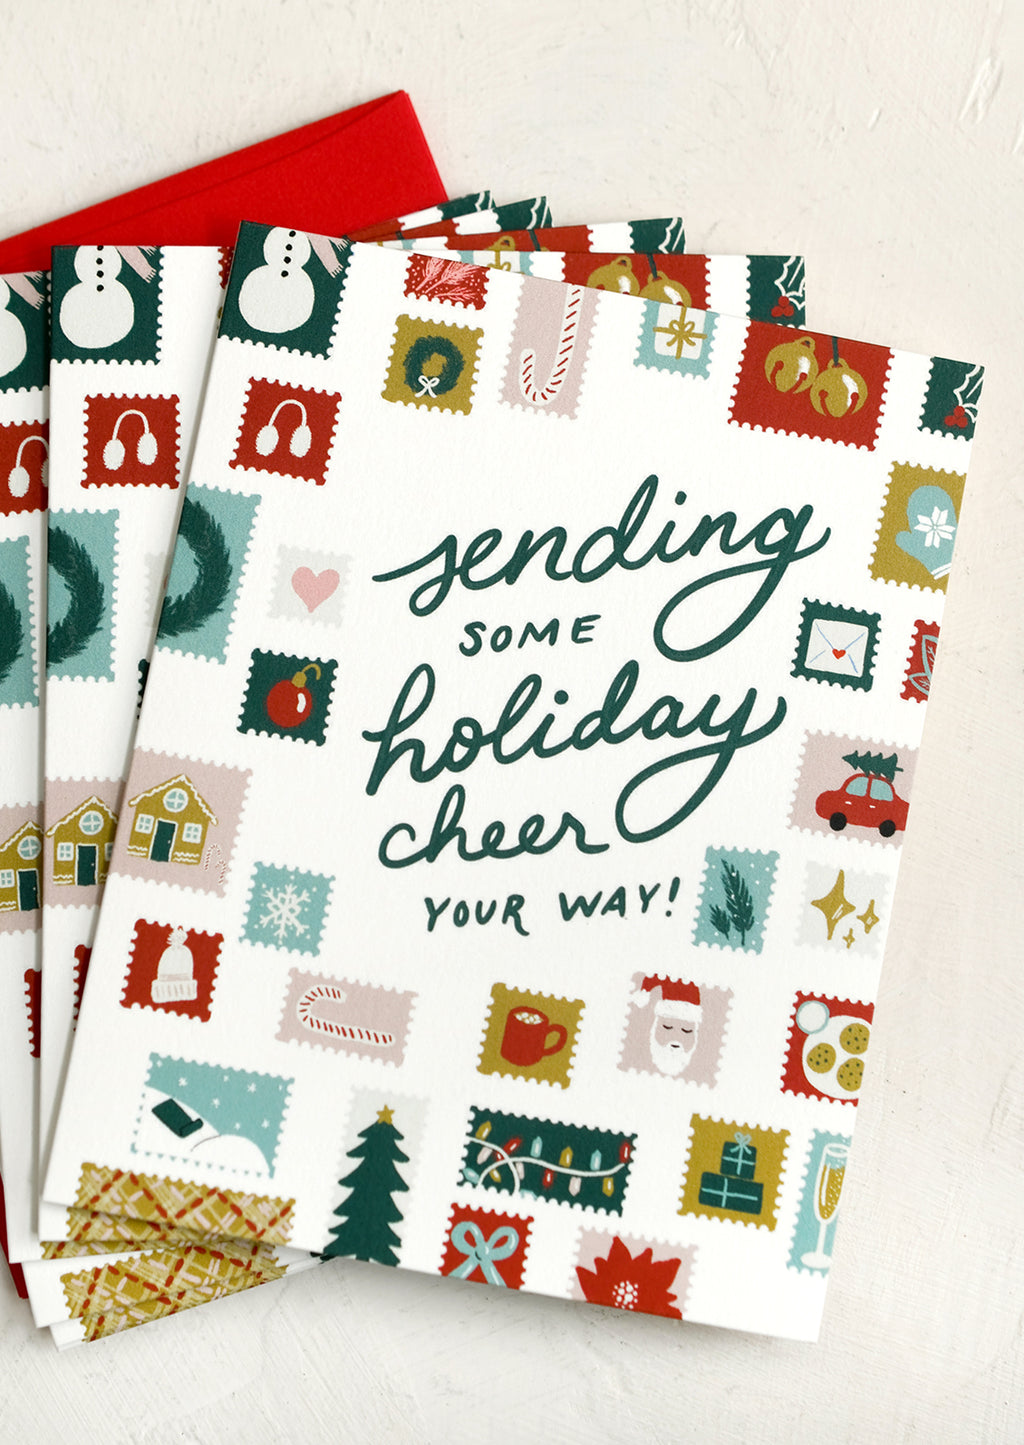 3: A holiday card set reading "Sending some holiday cheer your way!".